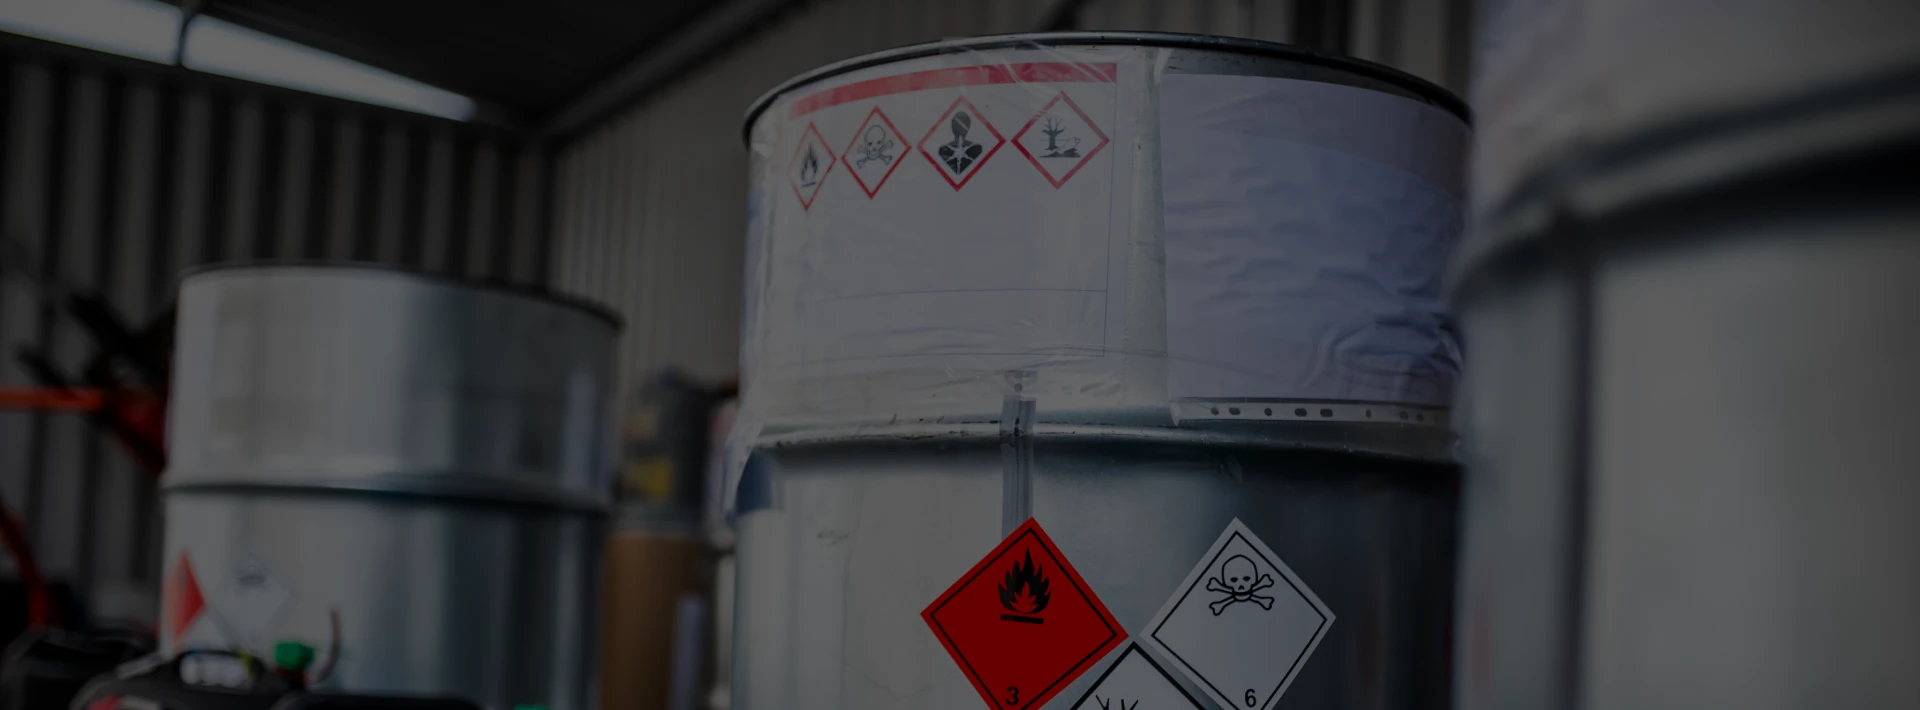 Comprehensive Hazardous Waste Management, providing a one-stop solution for all your needs